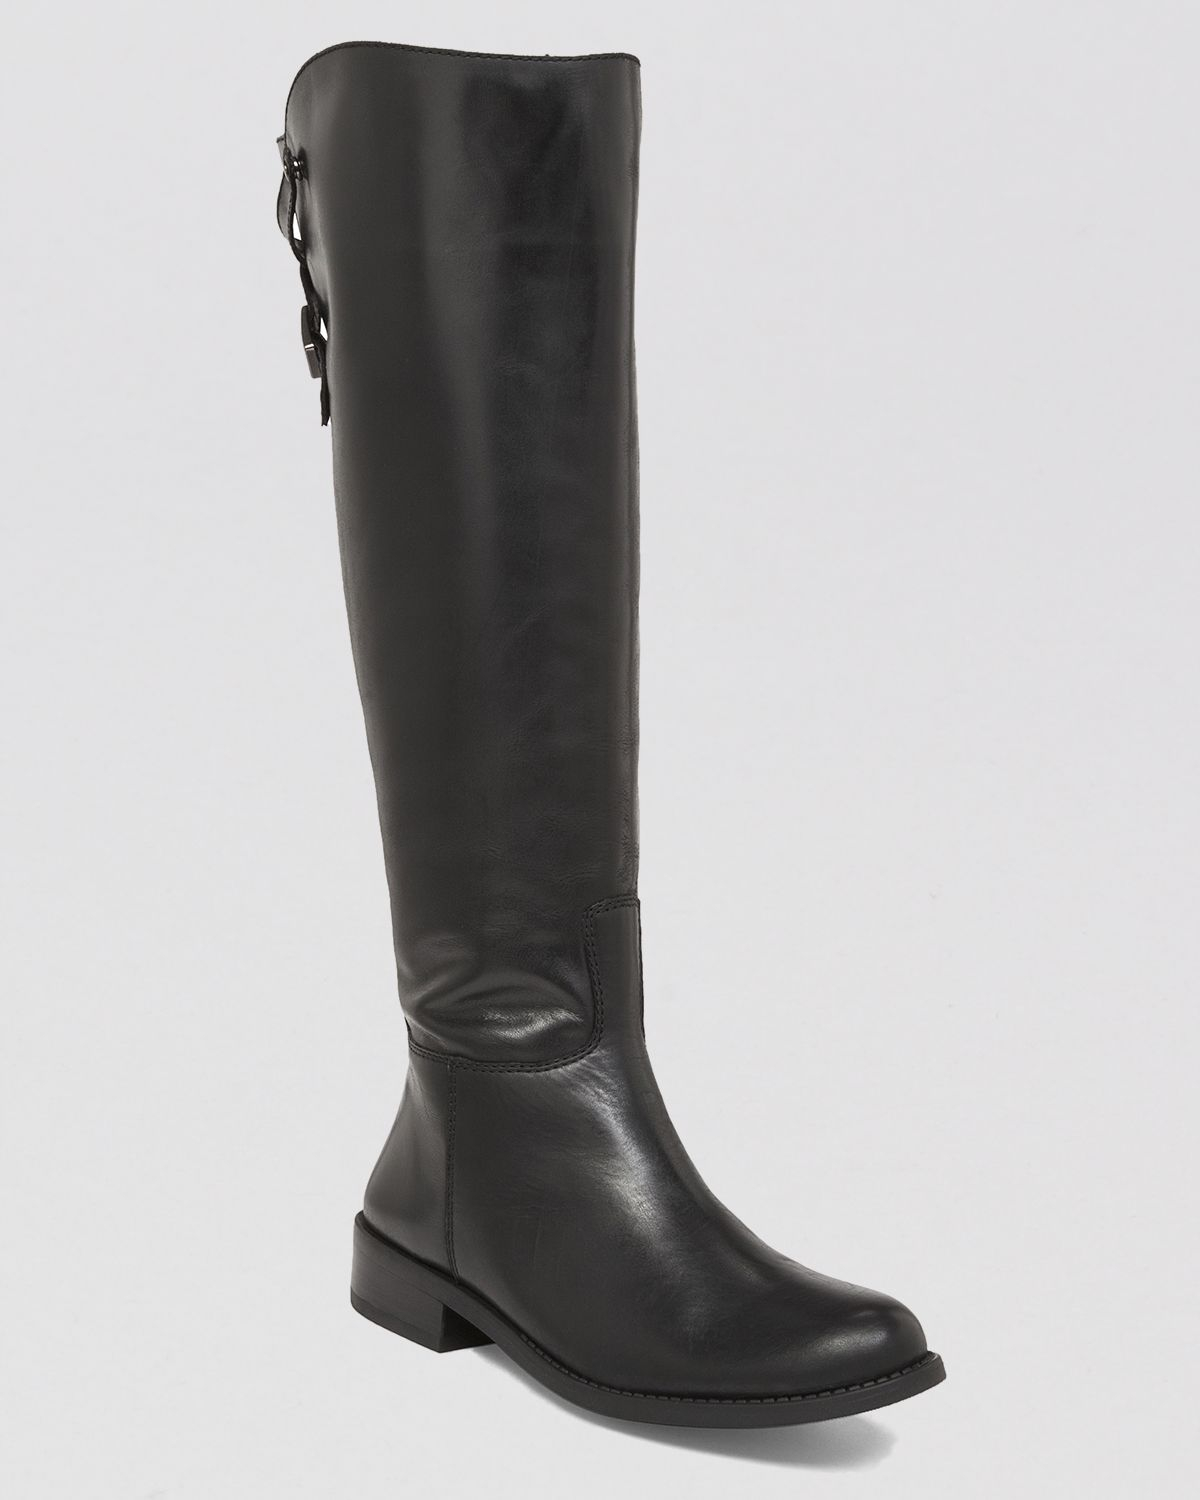 Vince Camuto Tall Riding Boots - Kadia Extended Calf in Black | Lyst